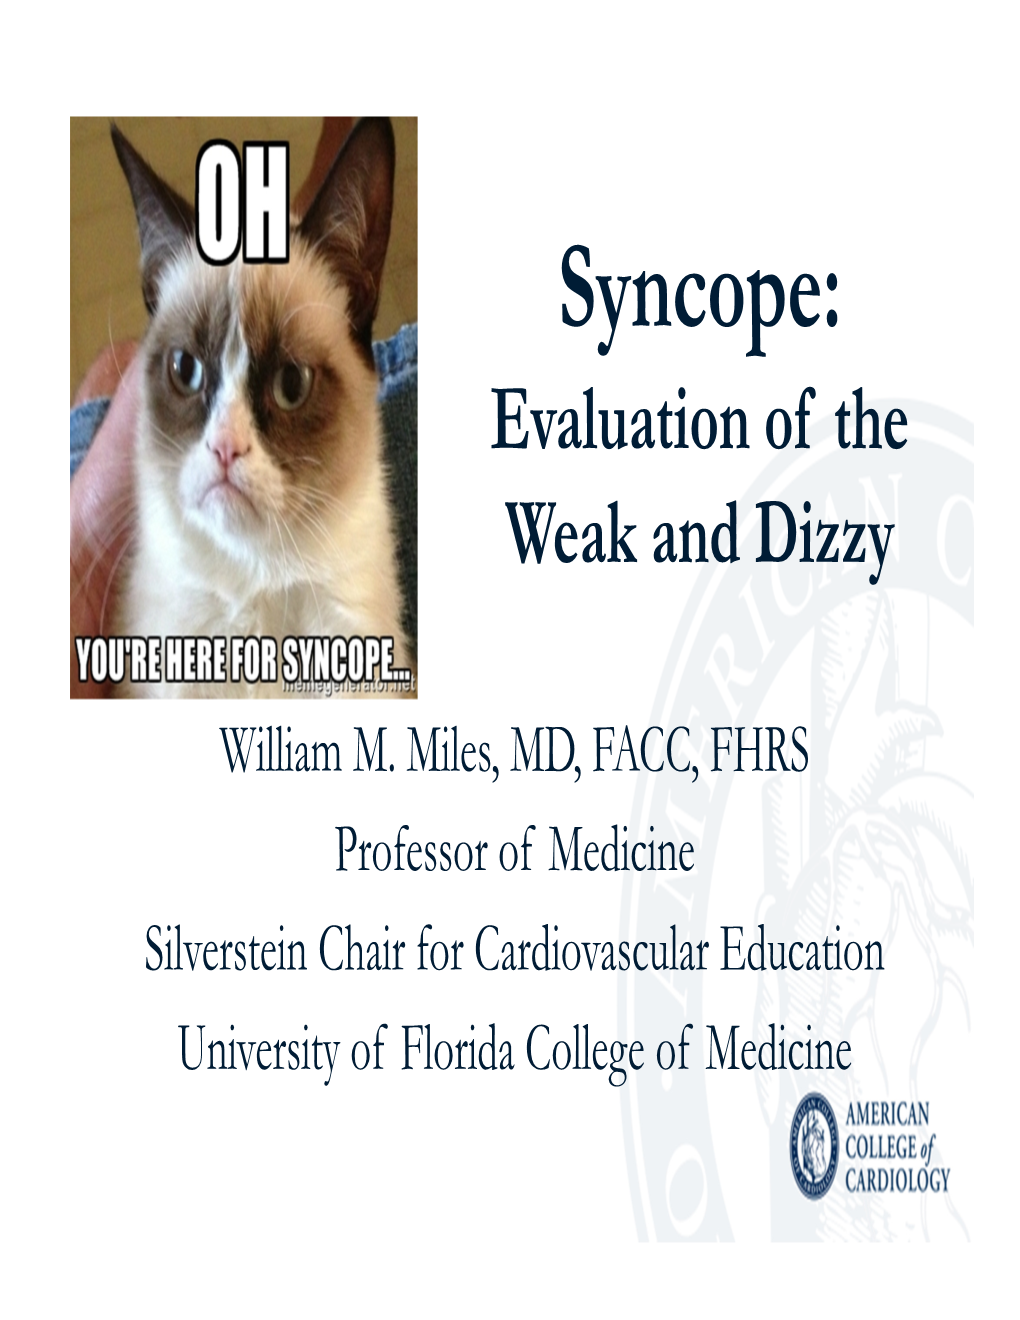 Syncope: Evaluation of the Weak and Dizzy